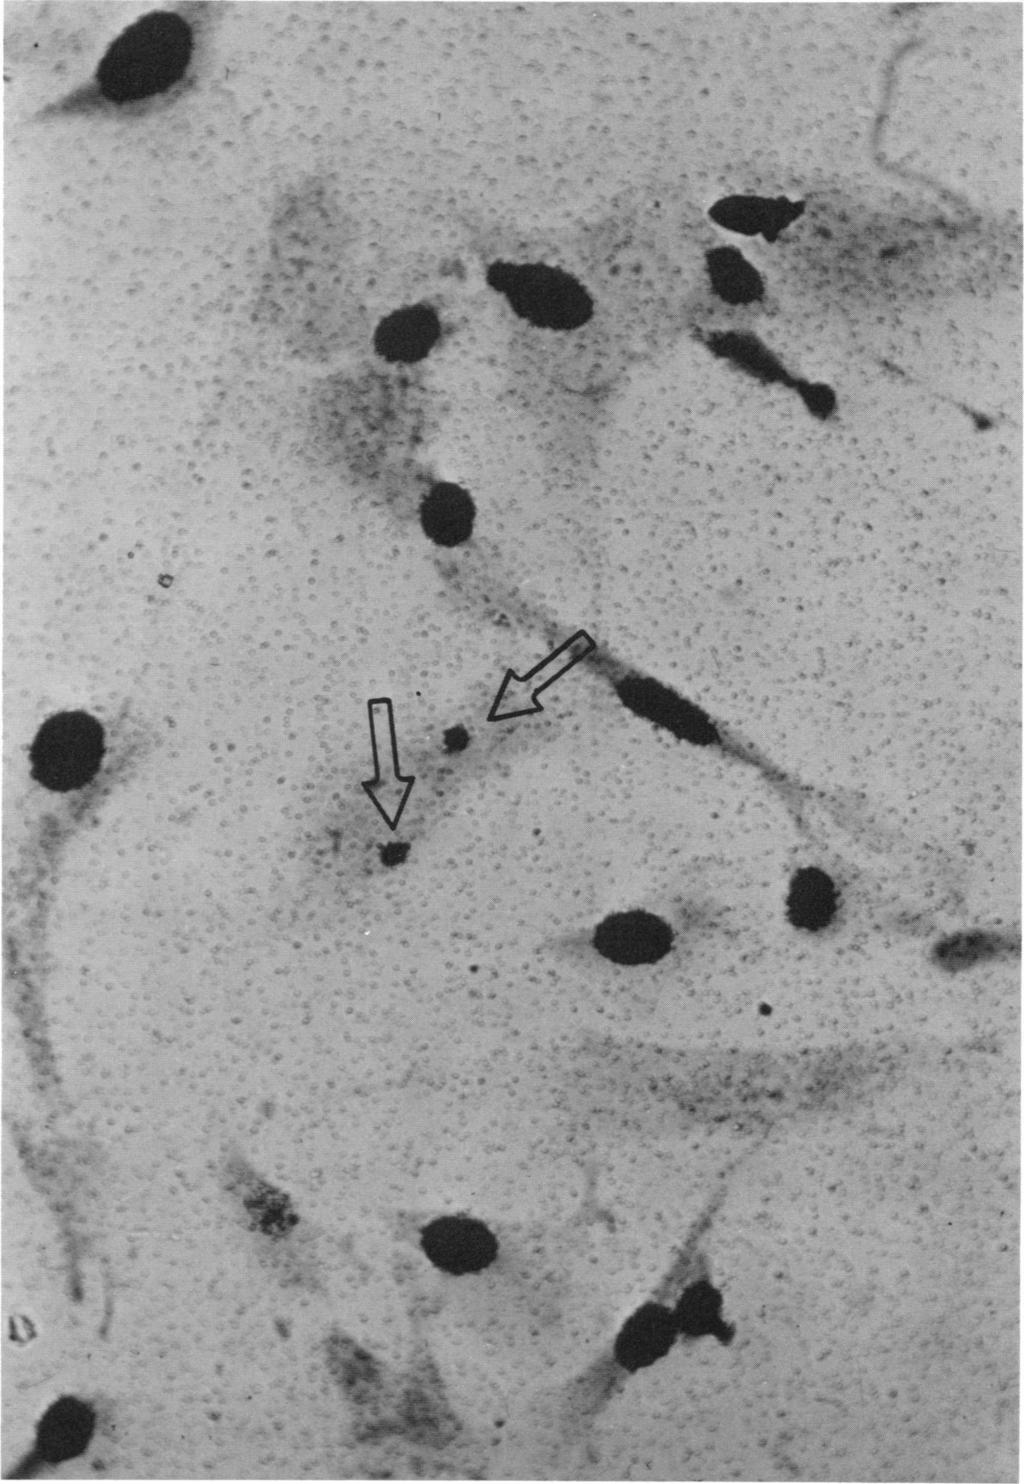 VOL. 24, 1972 ASSAY OF PARAVACCINIA VIRUS 141 Downloaded from http://aem.asm.org/ FIG. 4. Same monolayer as in Fig. 3 after completion of autoradiography.